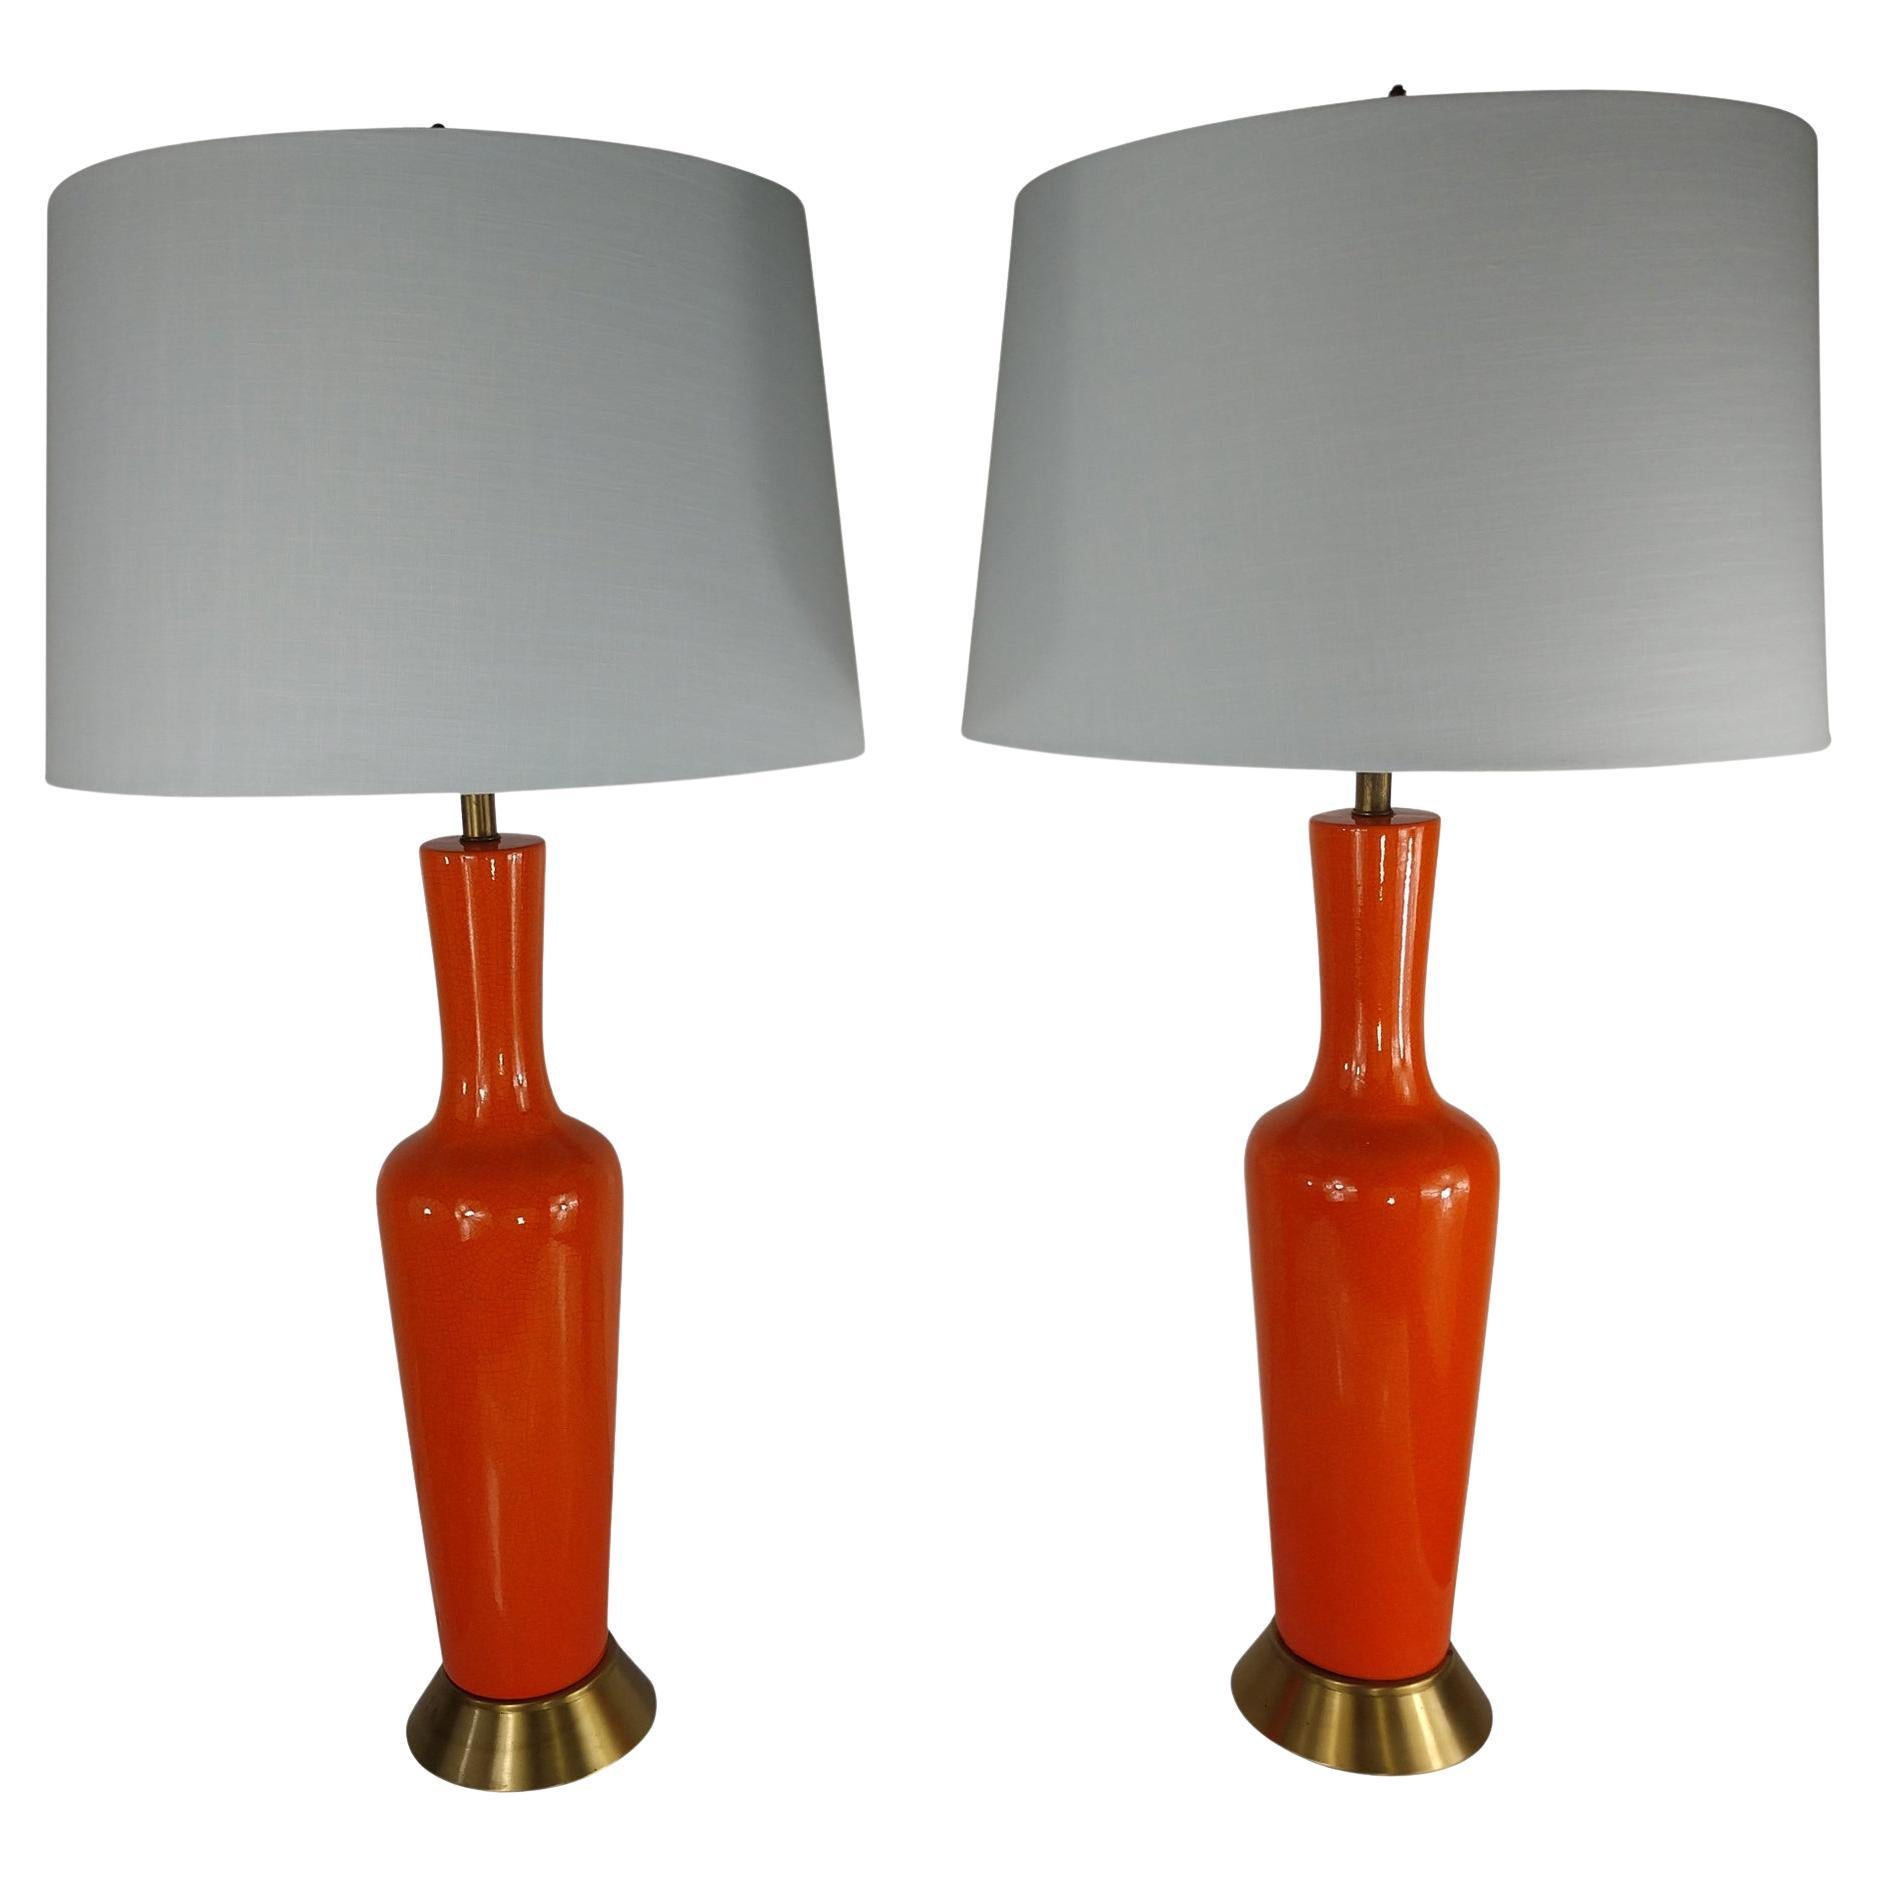 Pair of Mid-Century Modern Table Lamps with Orange Crackle Glaze, C1958 For Sale